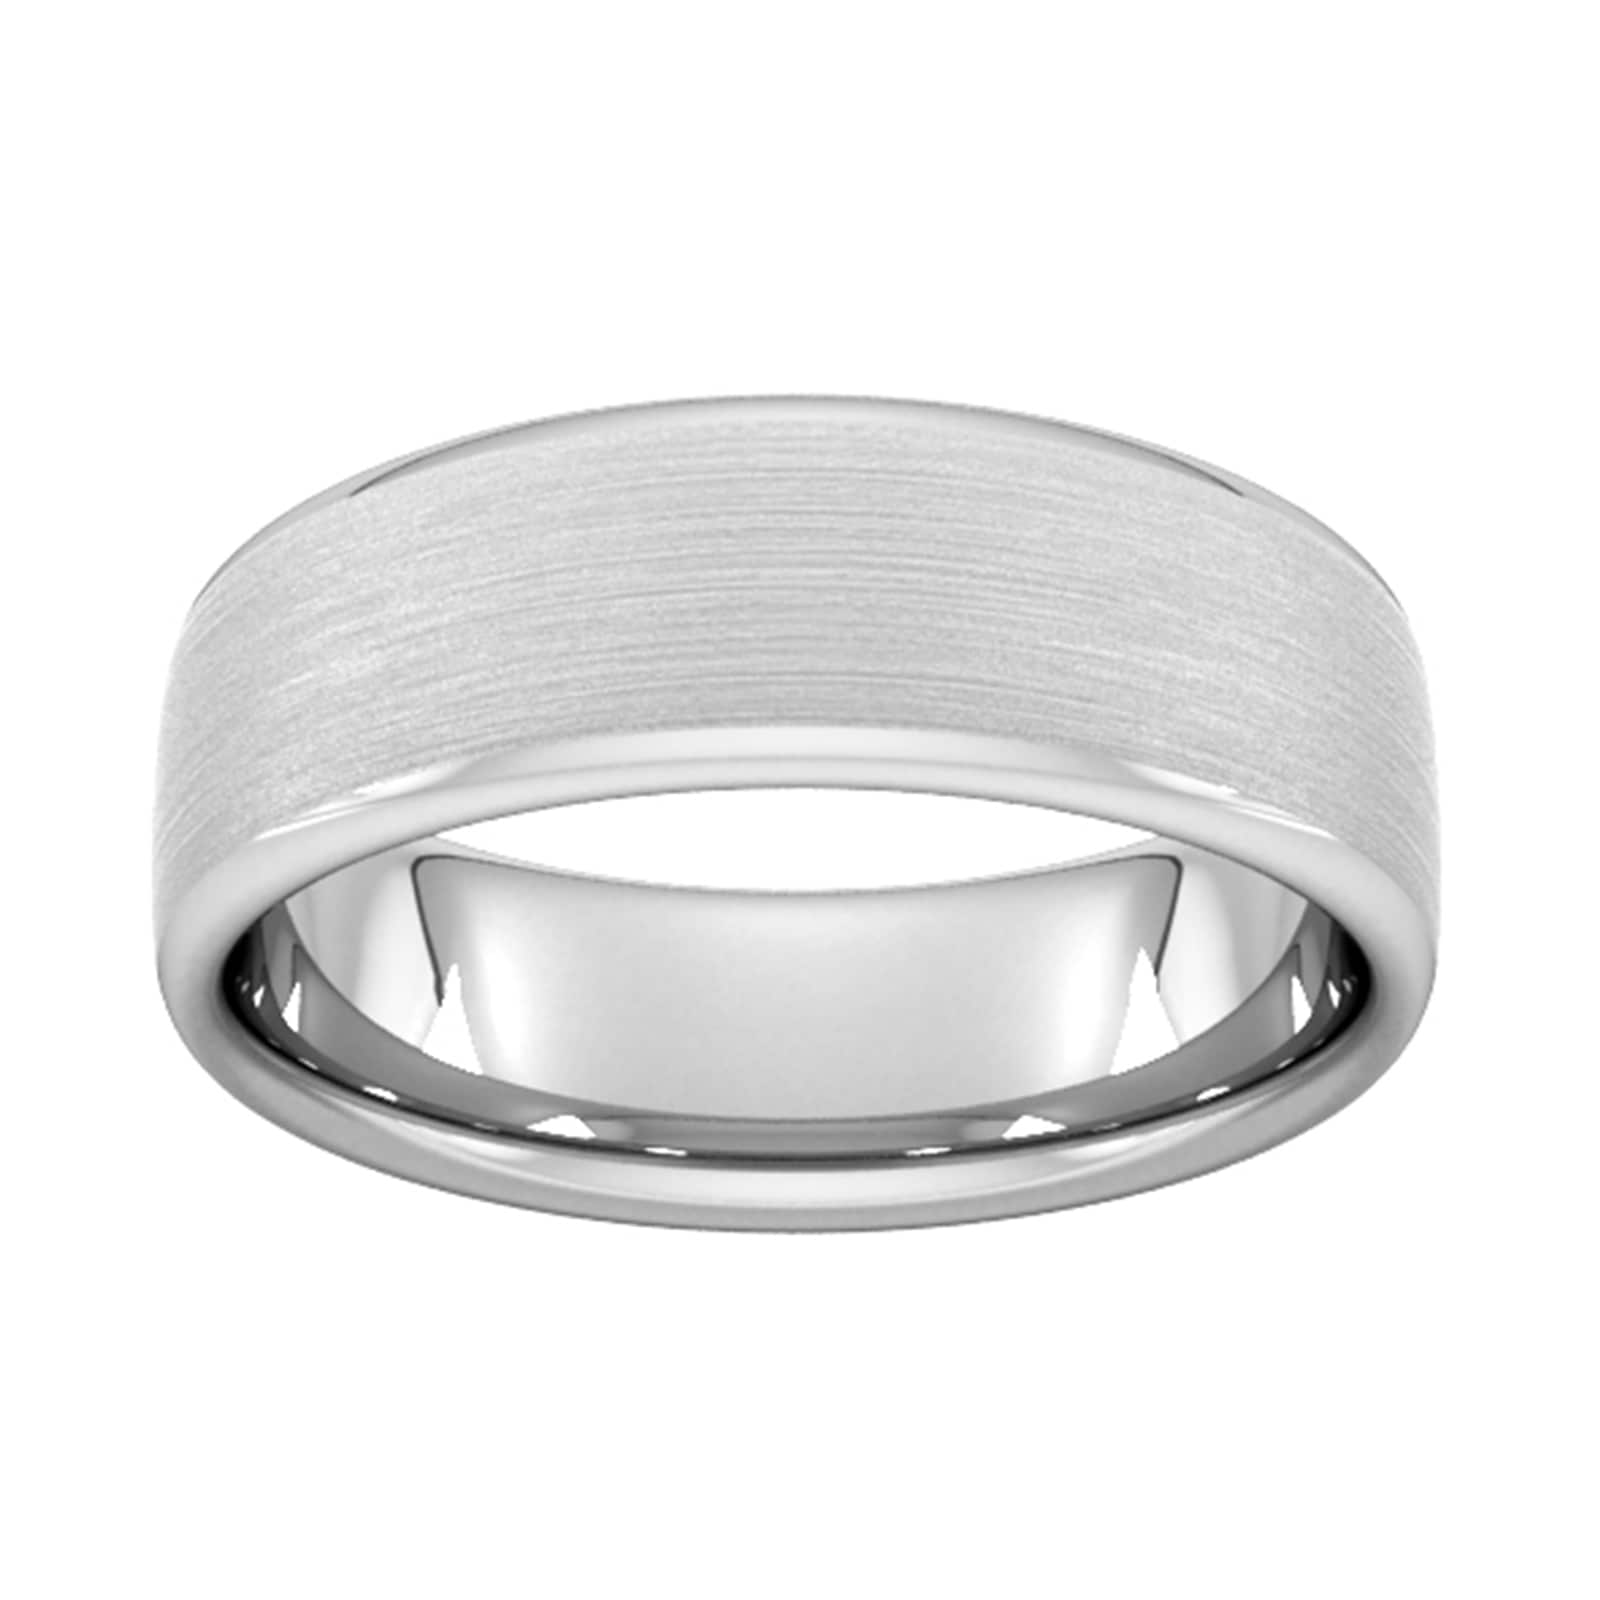 7mm Traditional Court Standard Matt Finished Wedding Ring In 9 Carat White Gold - Ring Size W